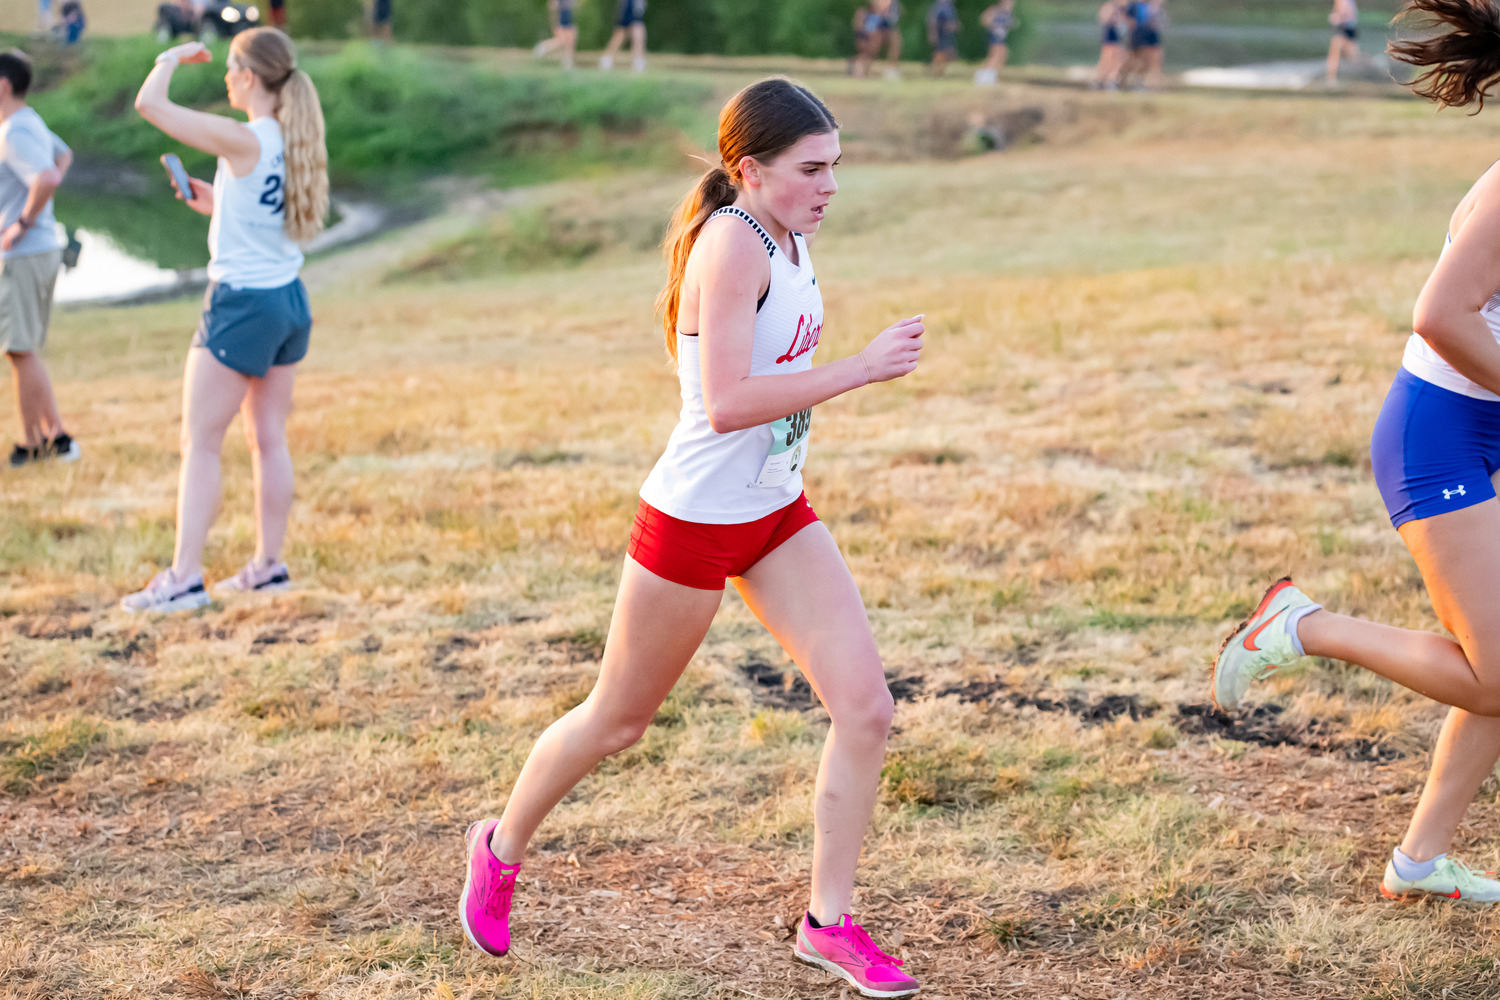 Cross country took on the rigorous course of the Southlake Invitational with top finishes for both boys and girls. “I am very satisfied with the time I ran this weekend,” Senior Sydni Wilkins said.